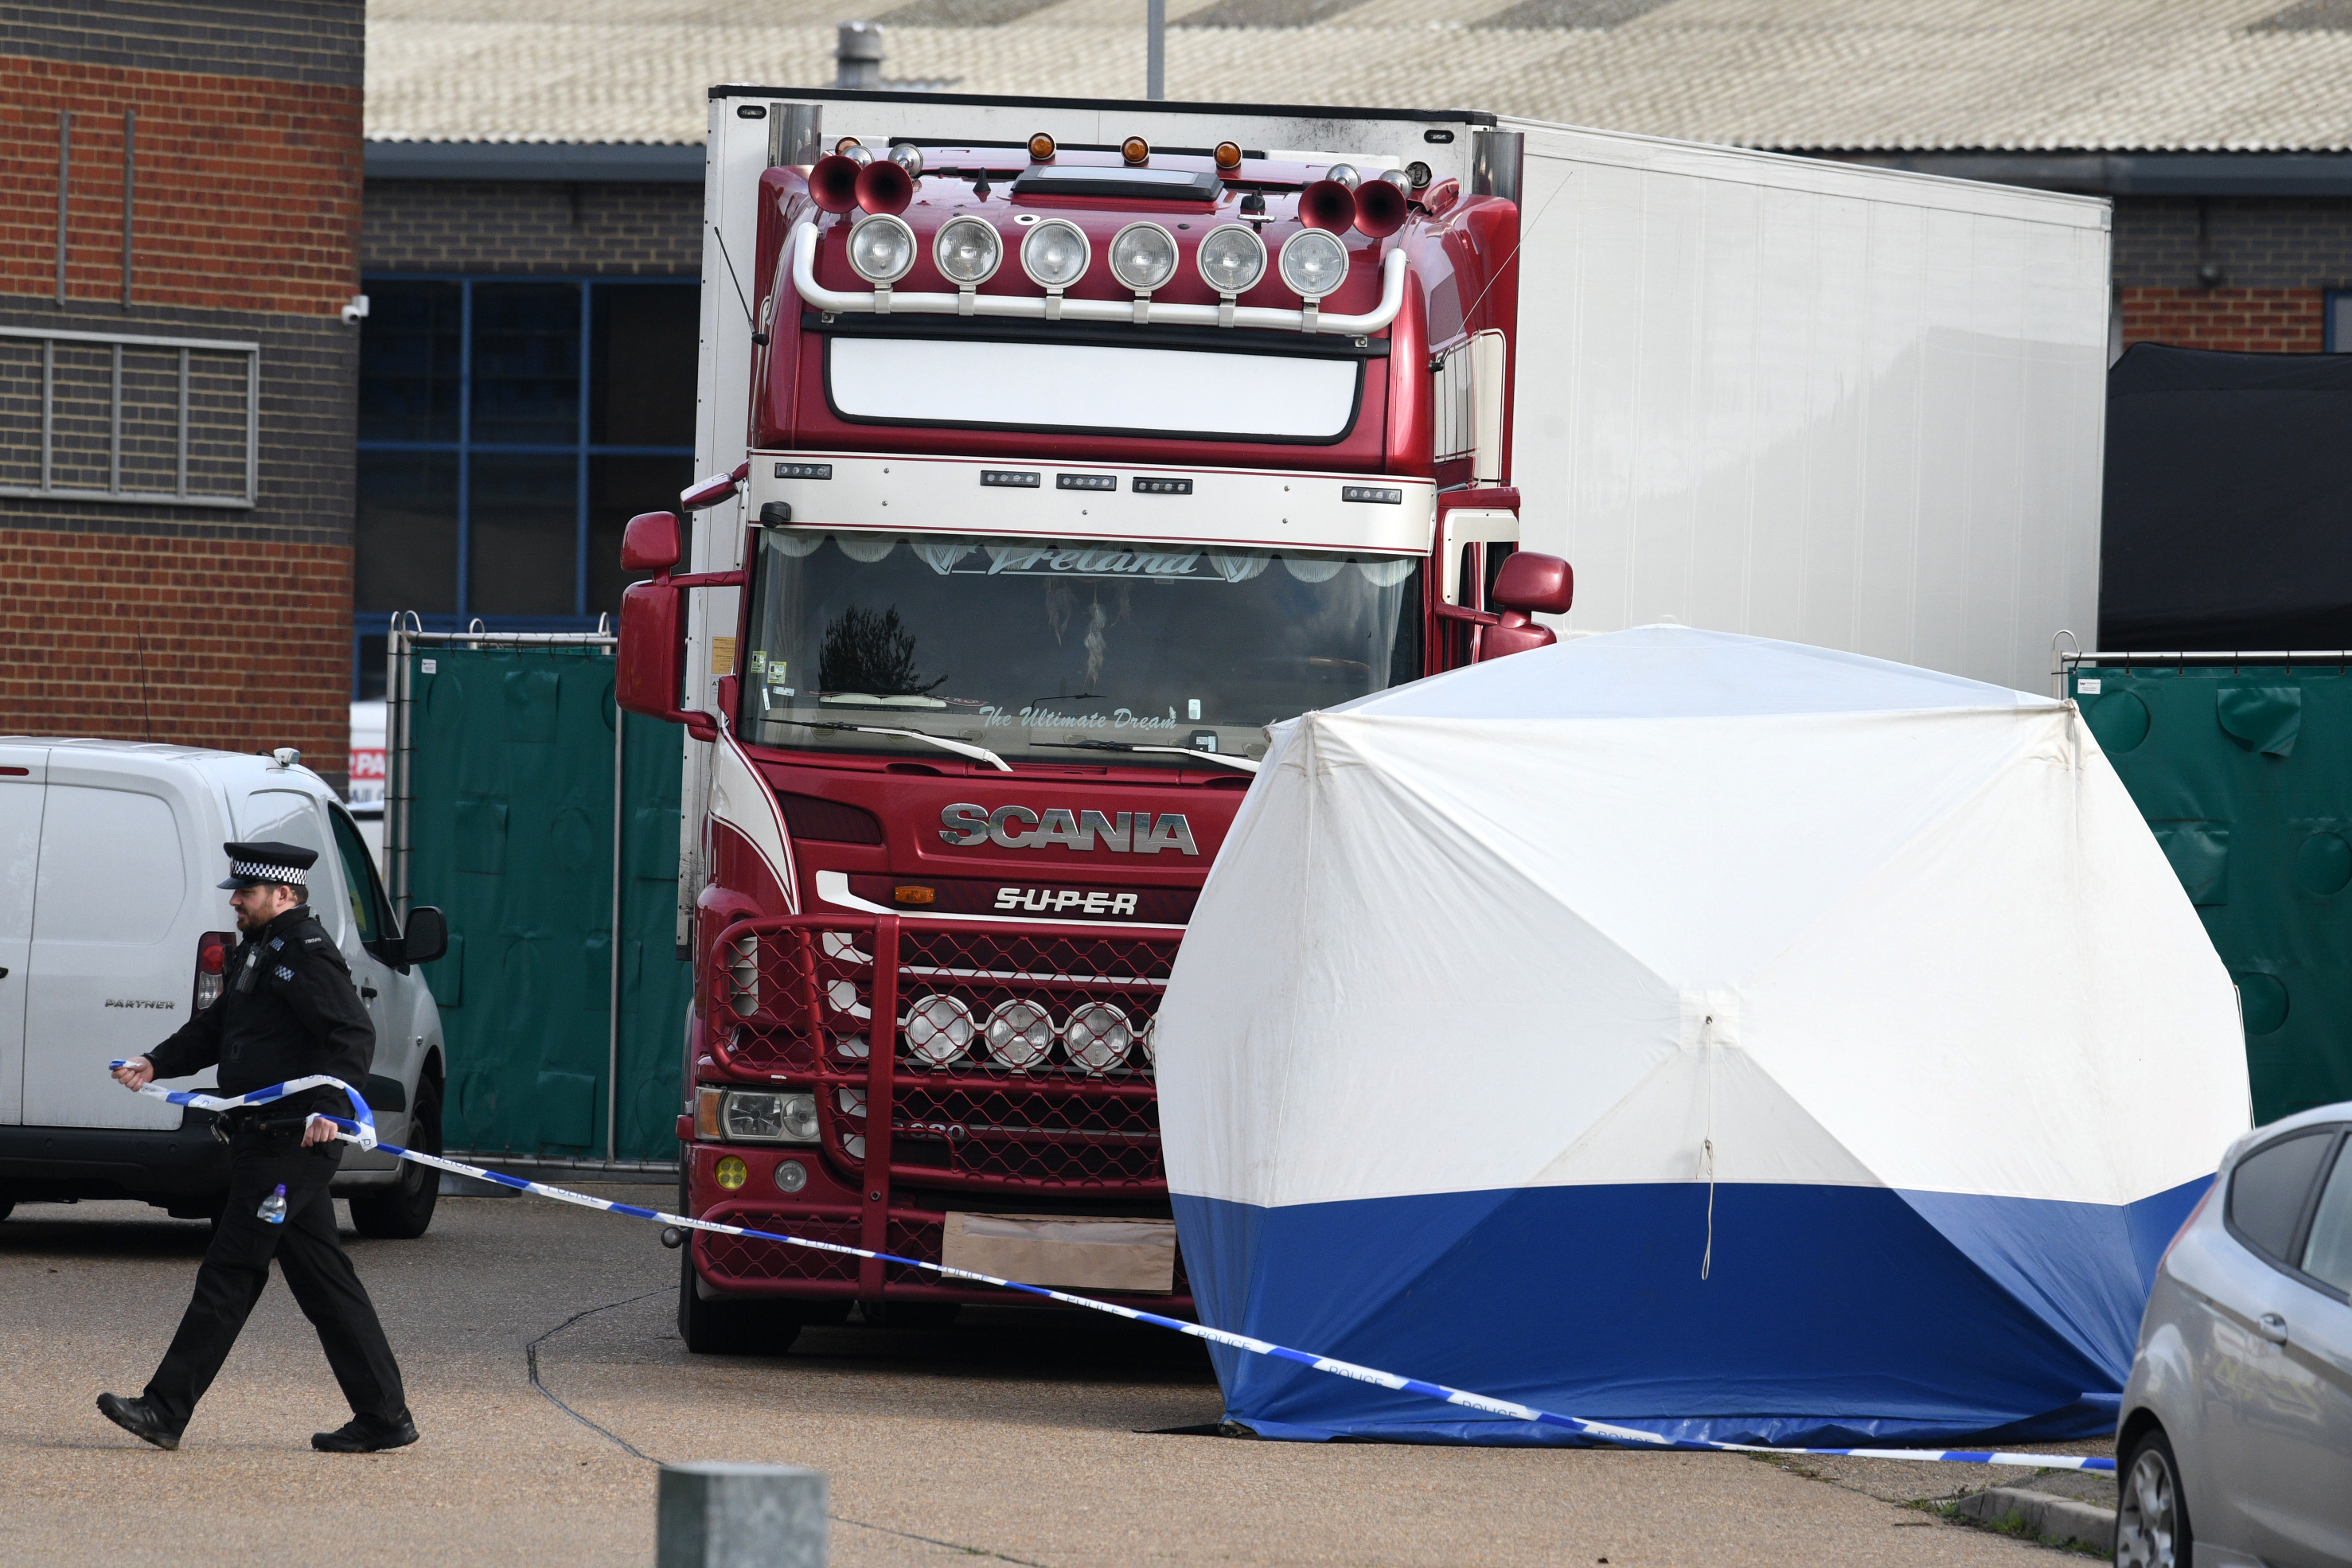 Police stand guard at the site where 39 bodies were discovered in the back of a lorry on October 23, 2019 in Thurrock, England. (Leon Neal/Getty Images)